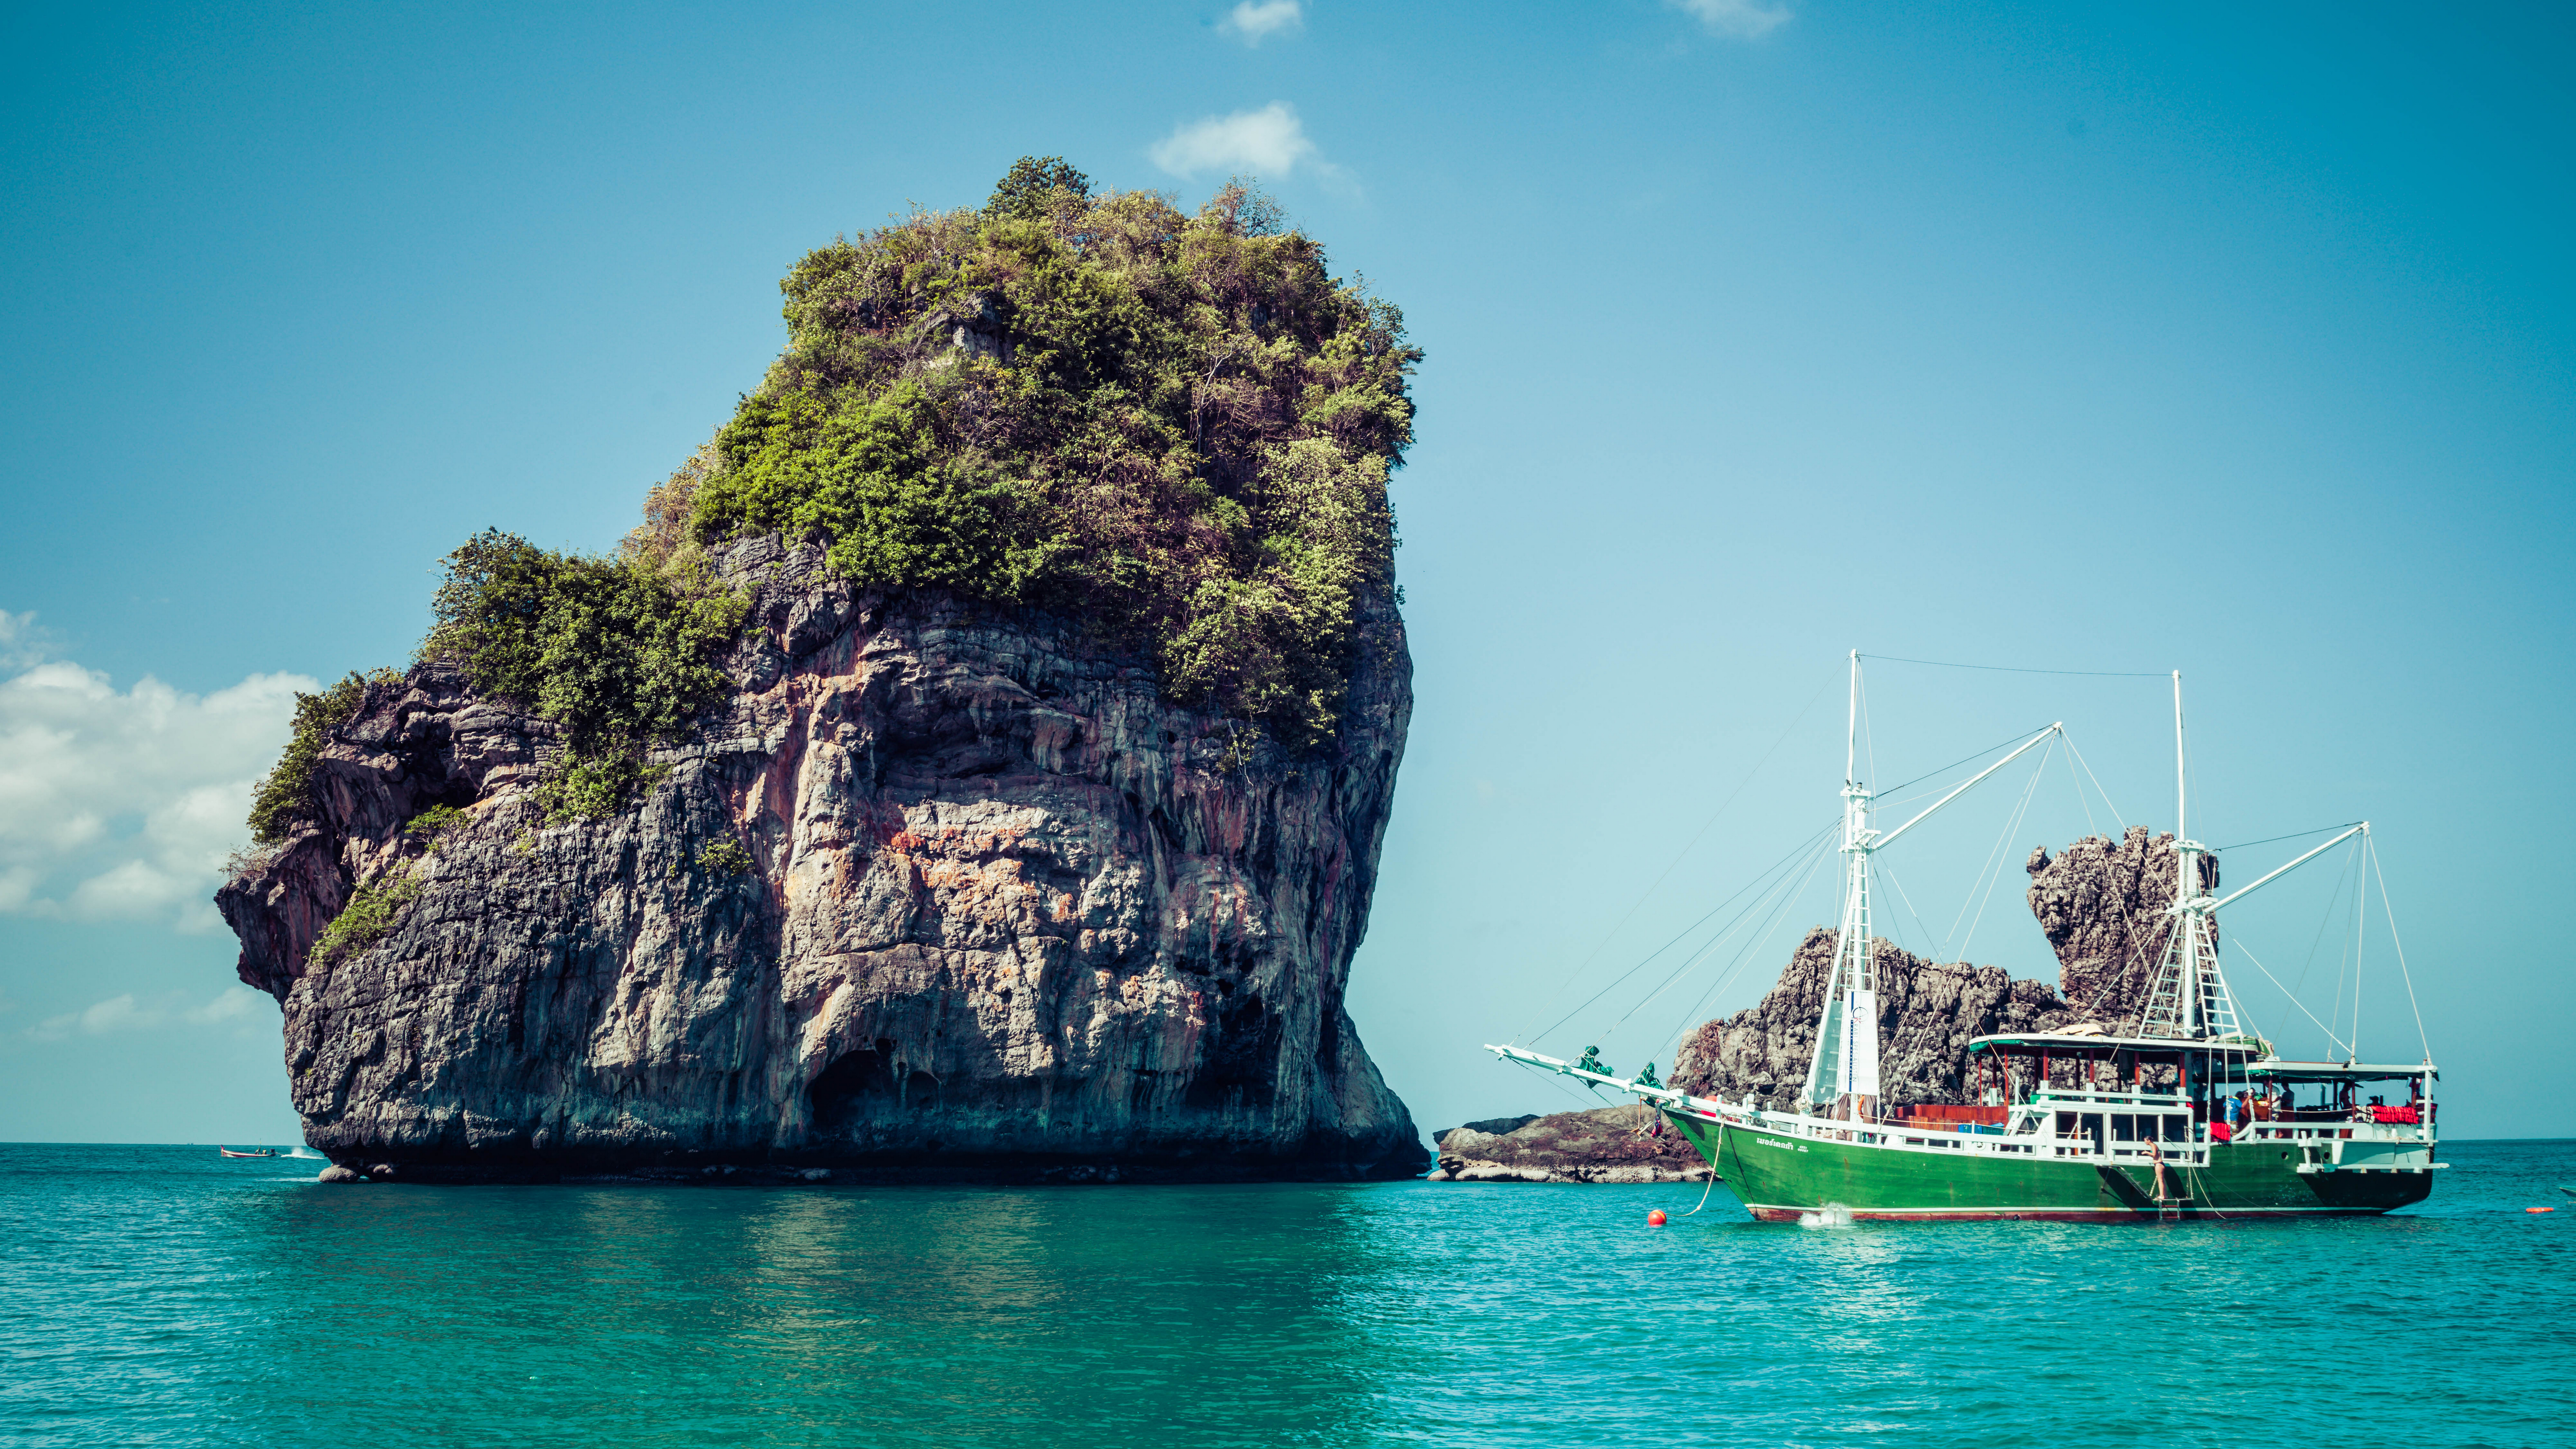 General 7680x4320 Trey Ratcliff photography Thailand rocks water boat